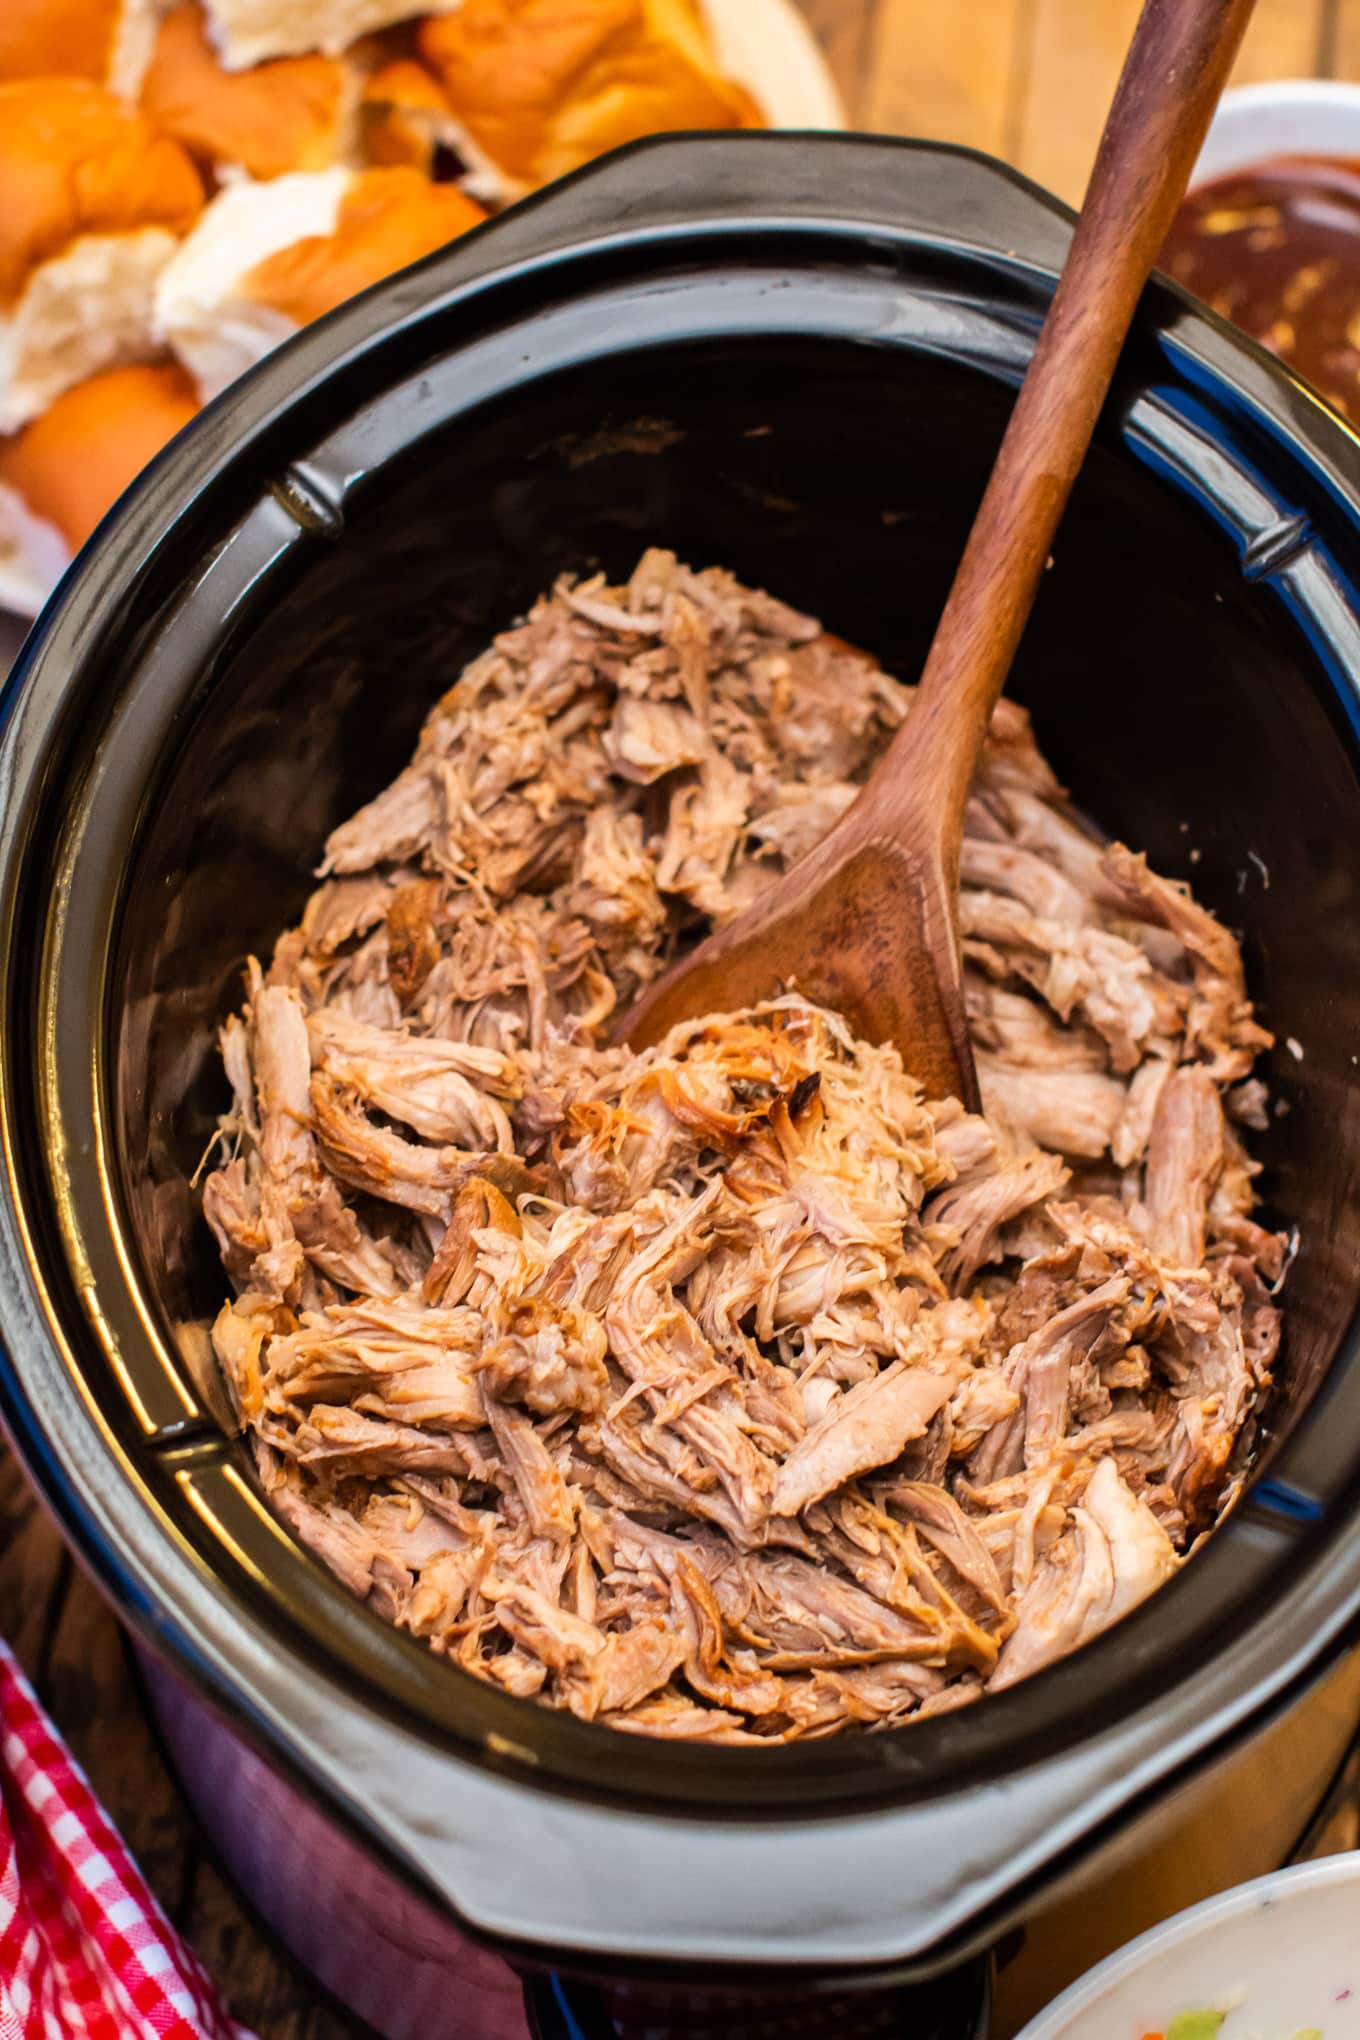 Shredded pulled pork with buns and barbecue sauce on side.